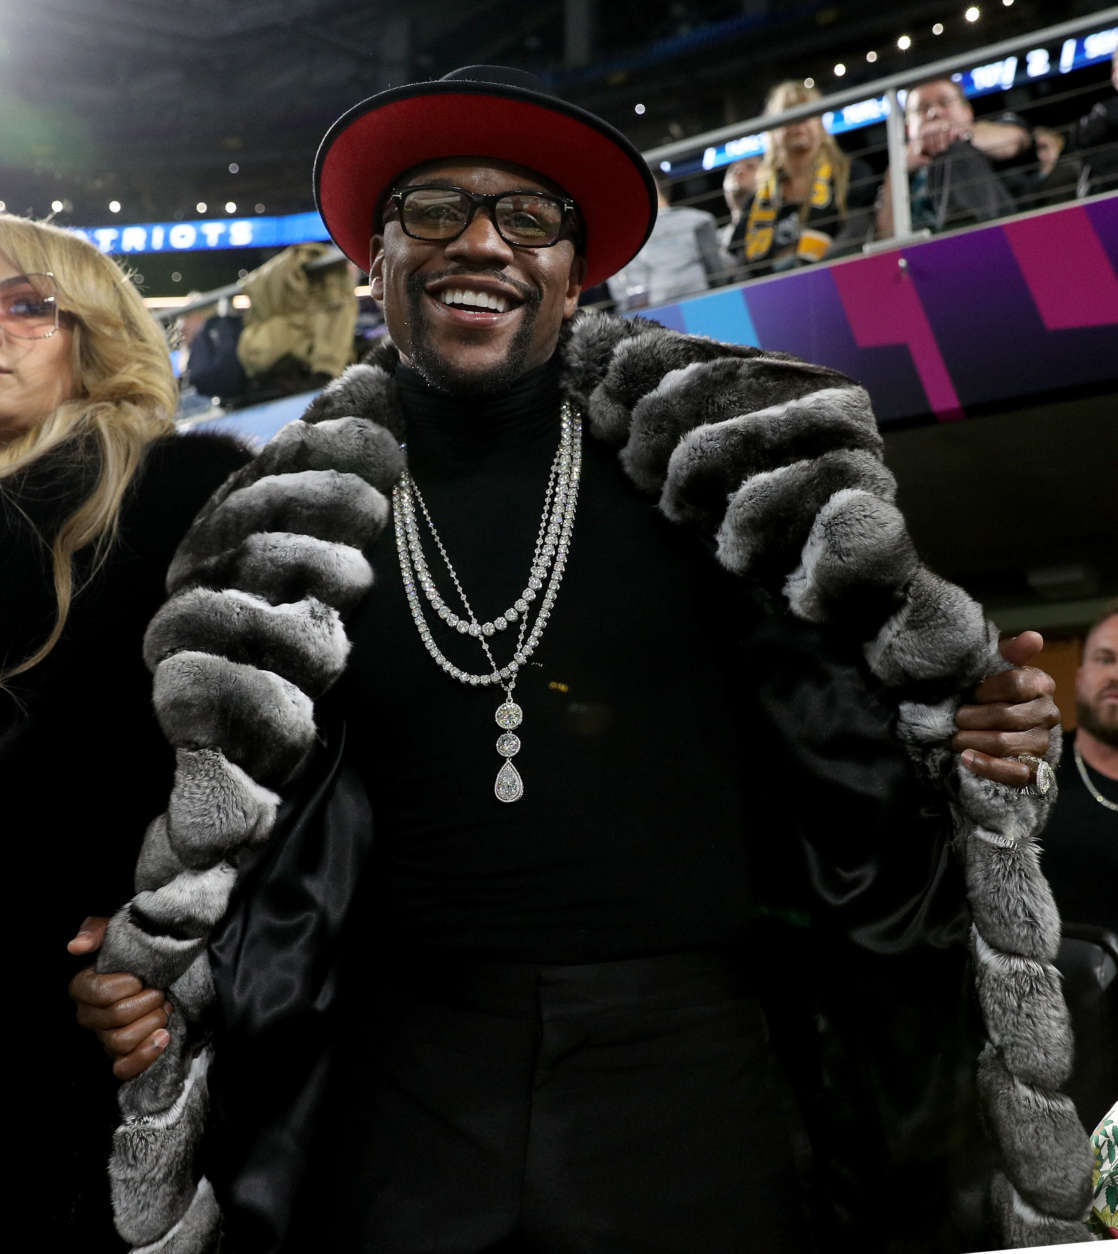 MINNEAPOLIS, MN - FEBRUARY 04:  Boxer Floyd Mayweather Jr. looks on during Super Bowl LII between the New England Patriots and the Philadelphia Eagles at U.S. Bank Stadium on February 4, 2018 in Minneapolis, Minnesota.  (Photo by Patrick Smith/Getty Images)